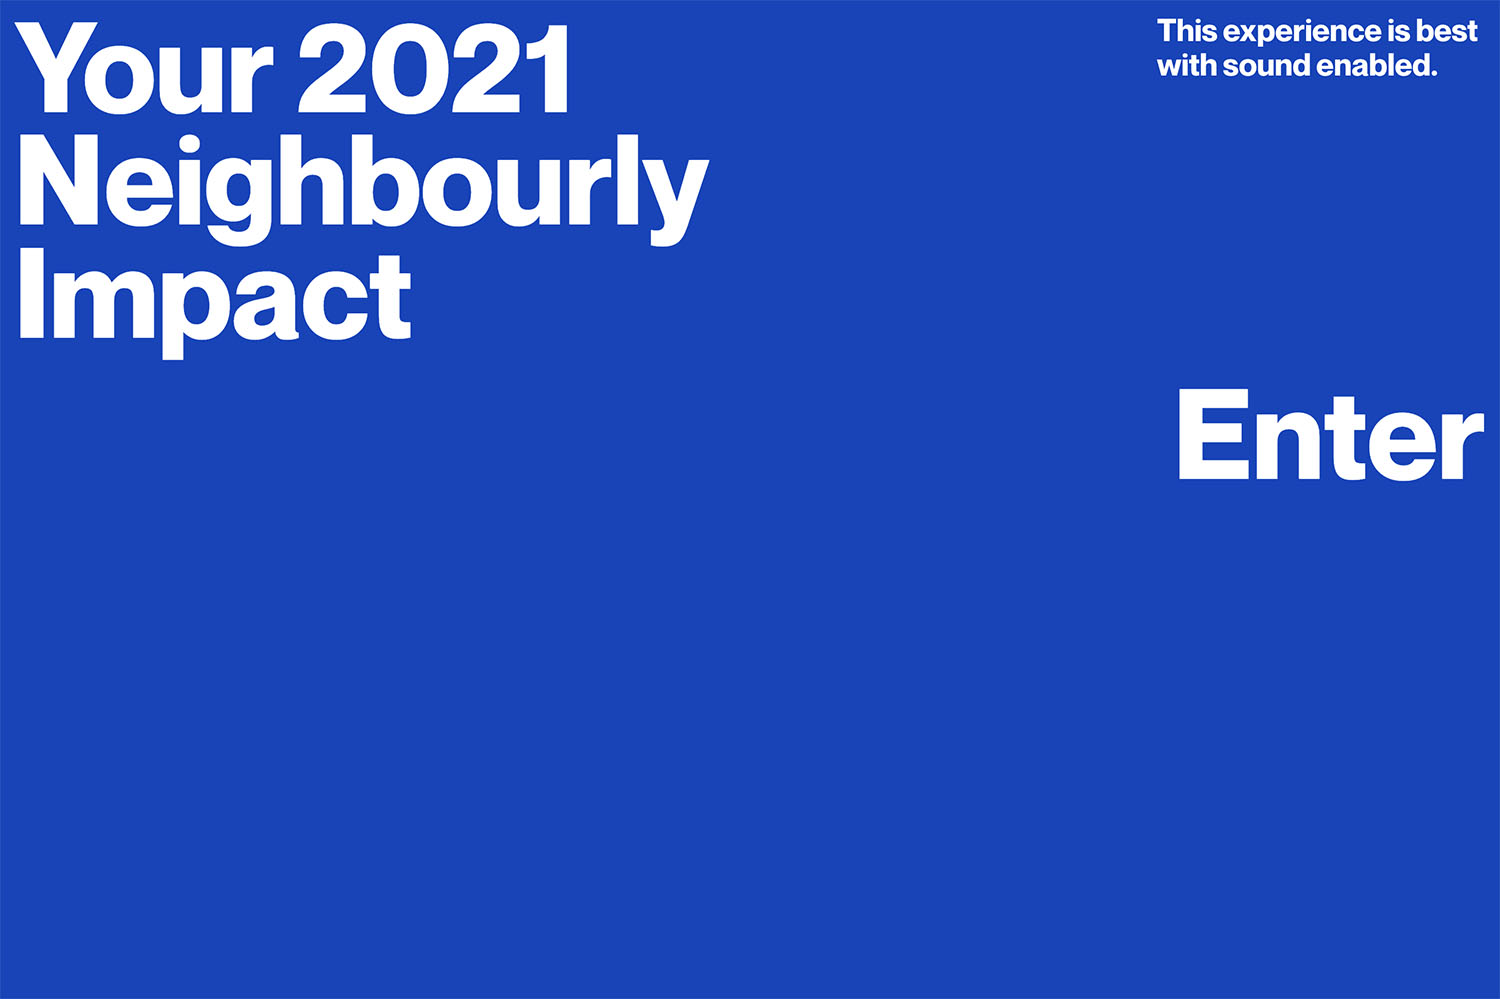 Your 2021 Neighbourly Impact